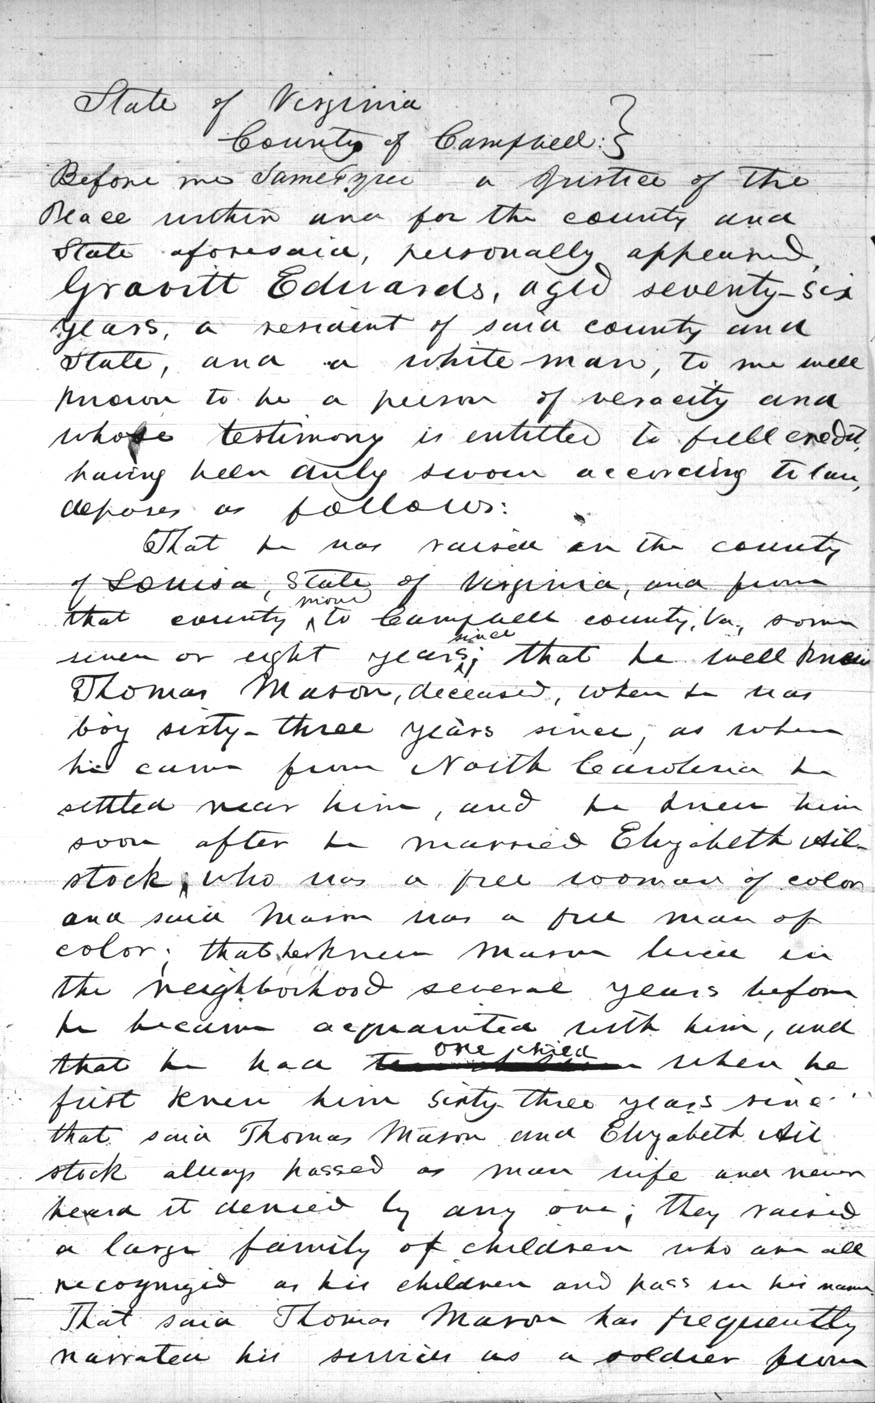 Written testimony from  Gravitt Edwards that the Masons always passed as man and wife